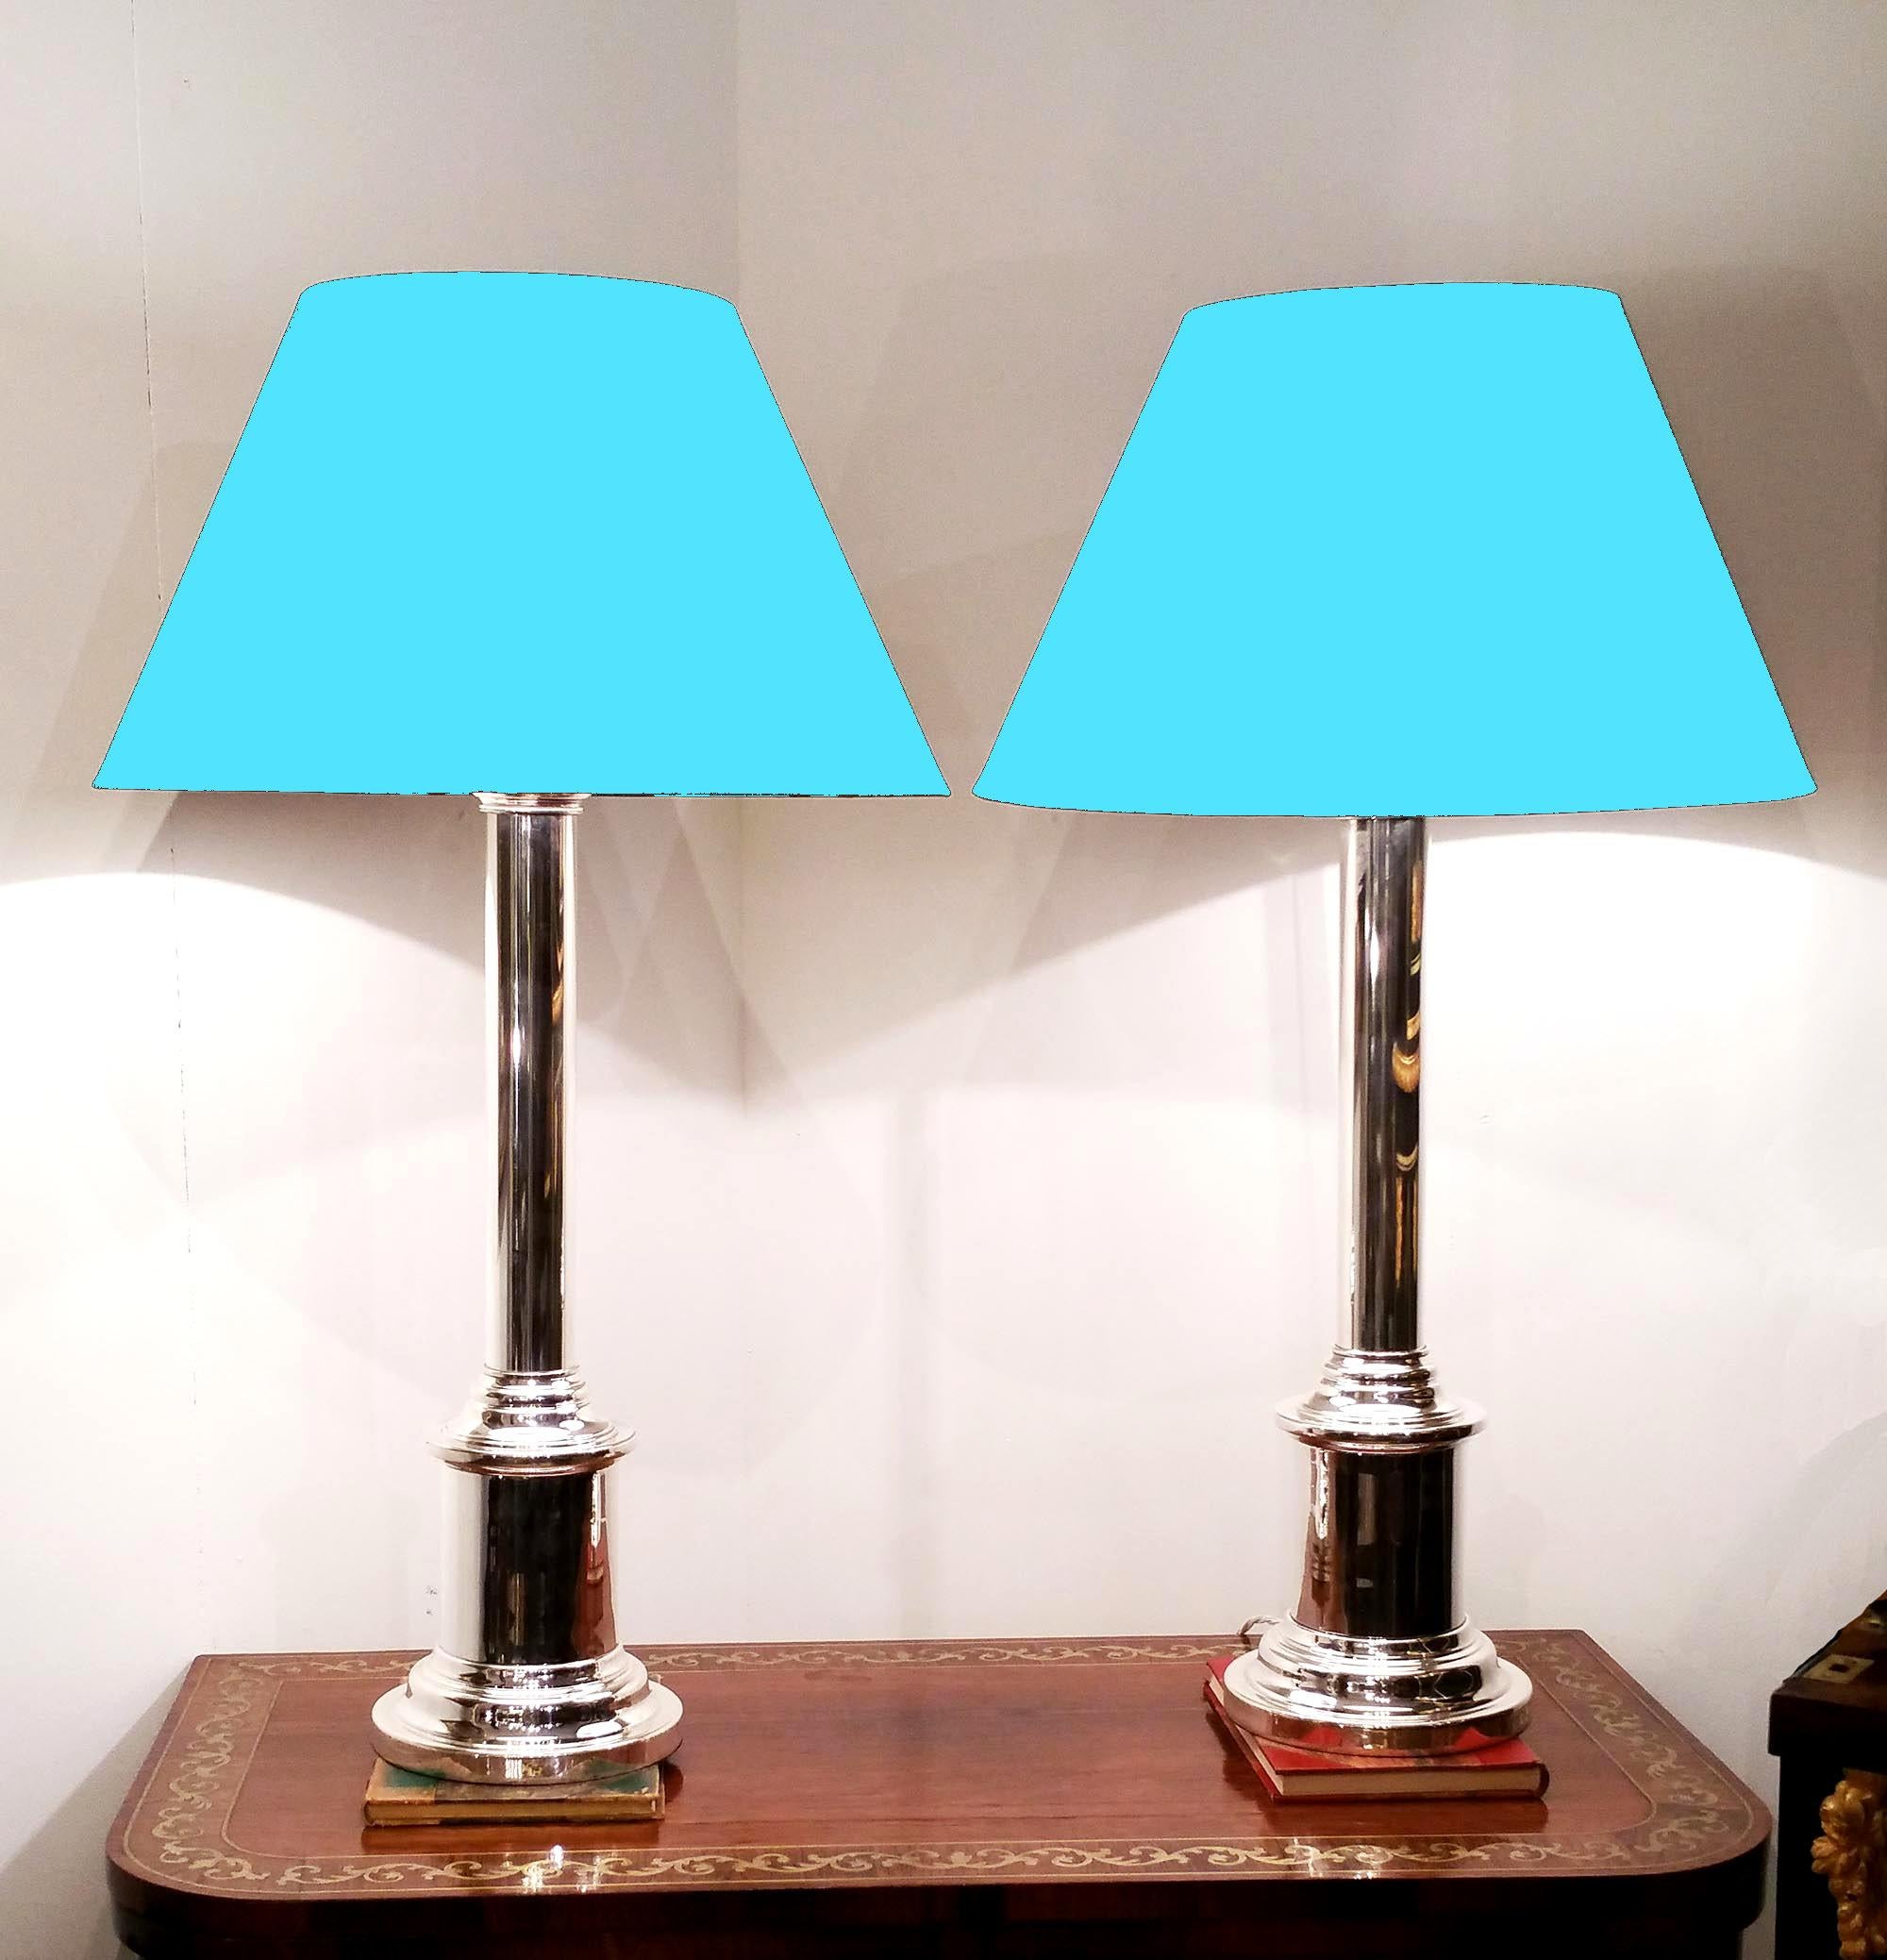 These sleek and elegant silver plated table lamps have a slender column design with bayonet fittings. Each light measures 6 in - 15 cm diameter on the base with a height of 25 in - 63.5 cm, and with a sample shade shown, measures approximately 32 in